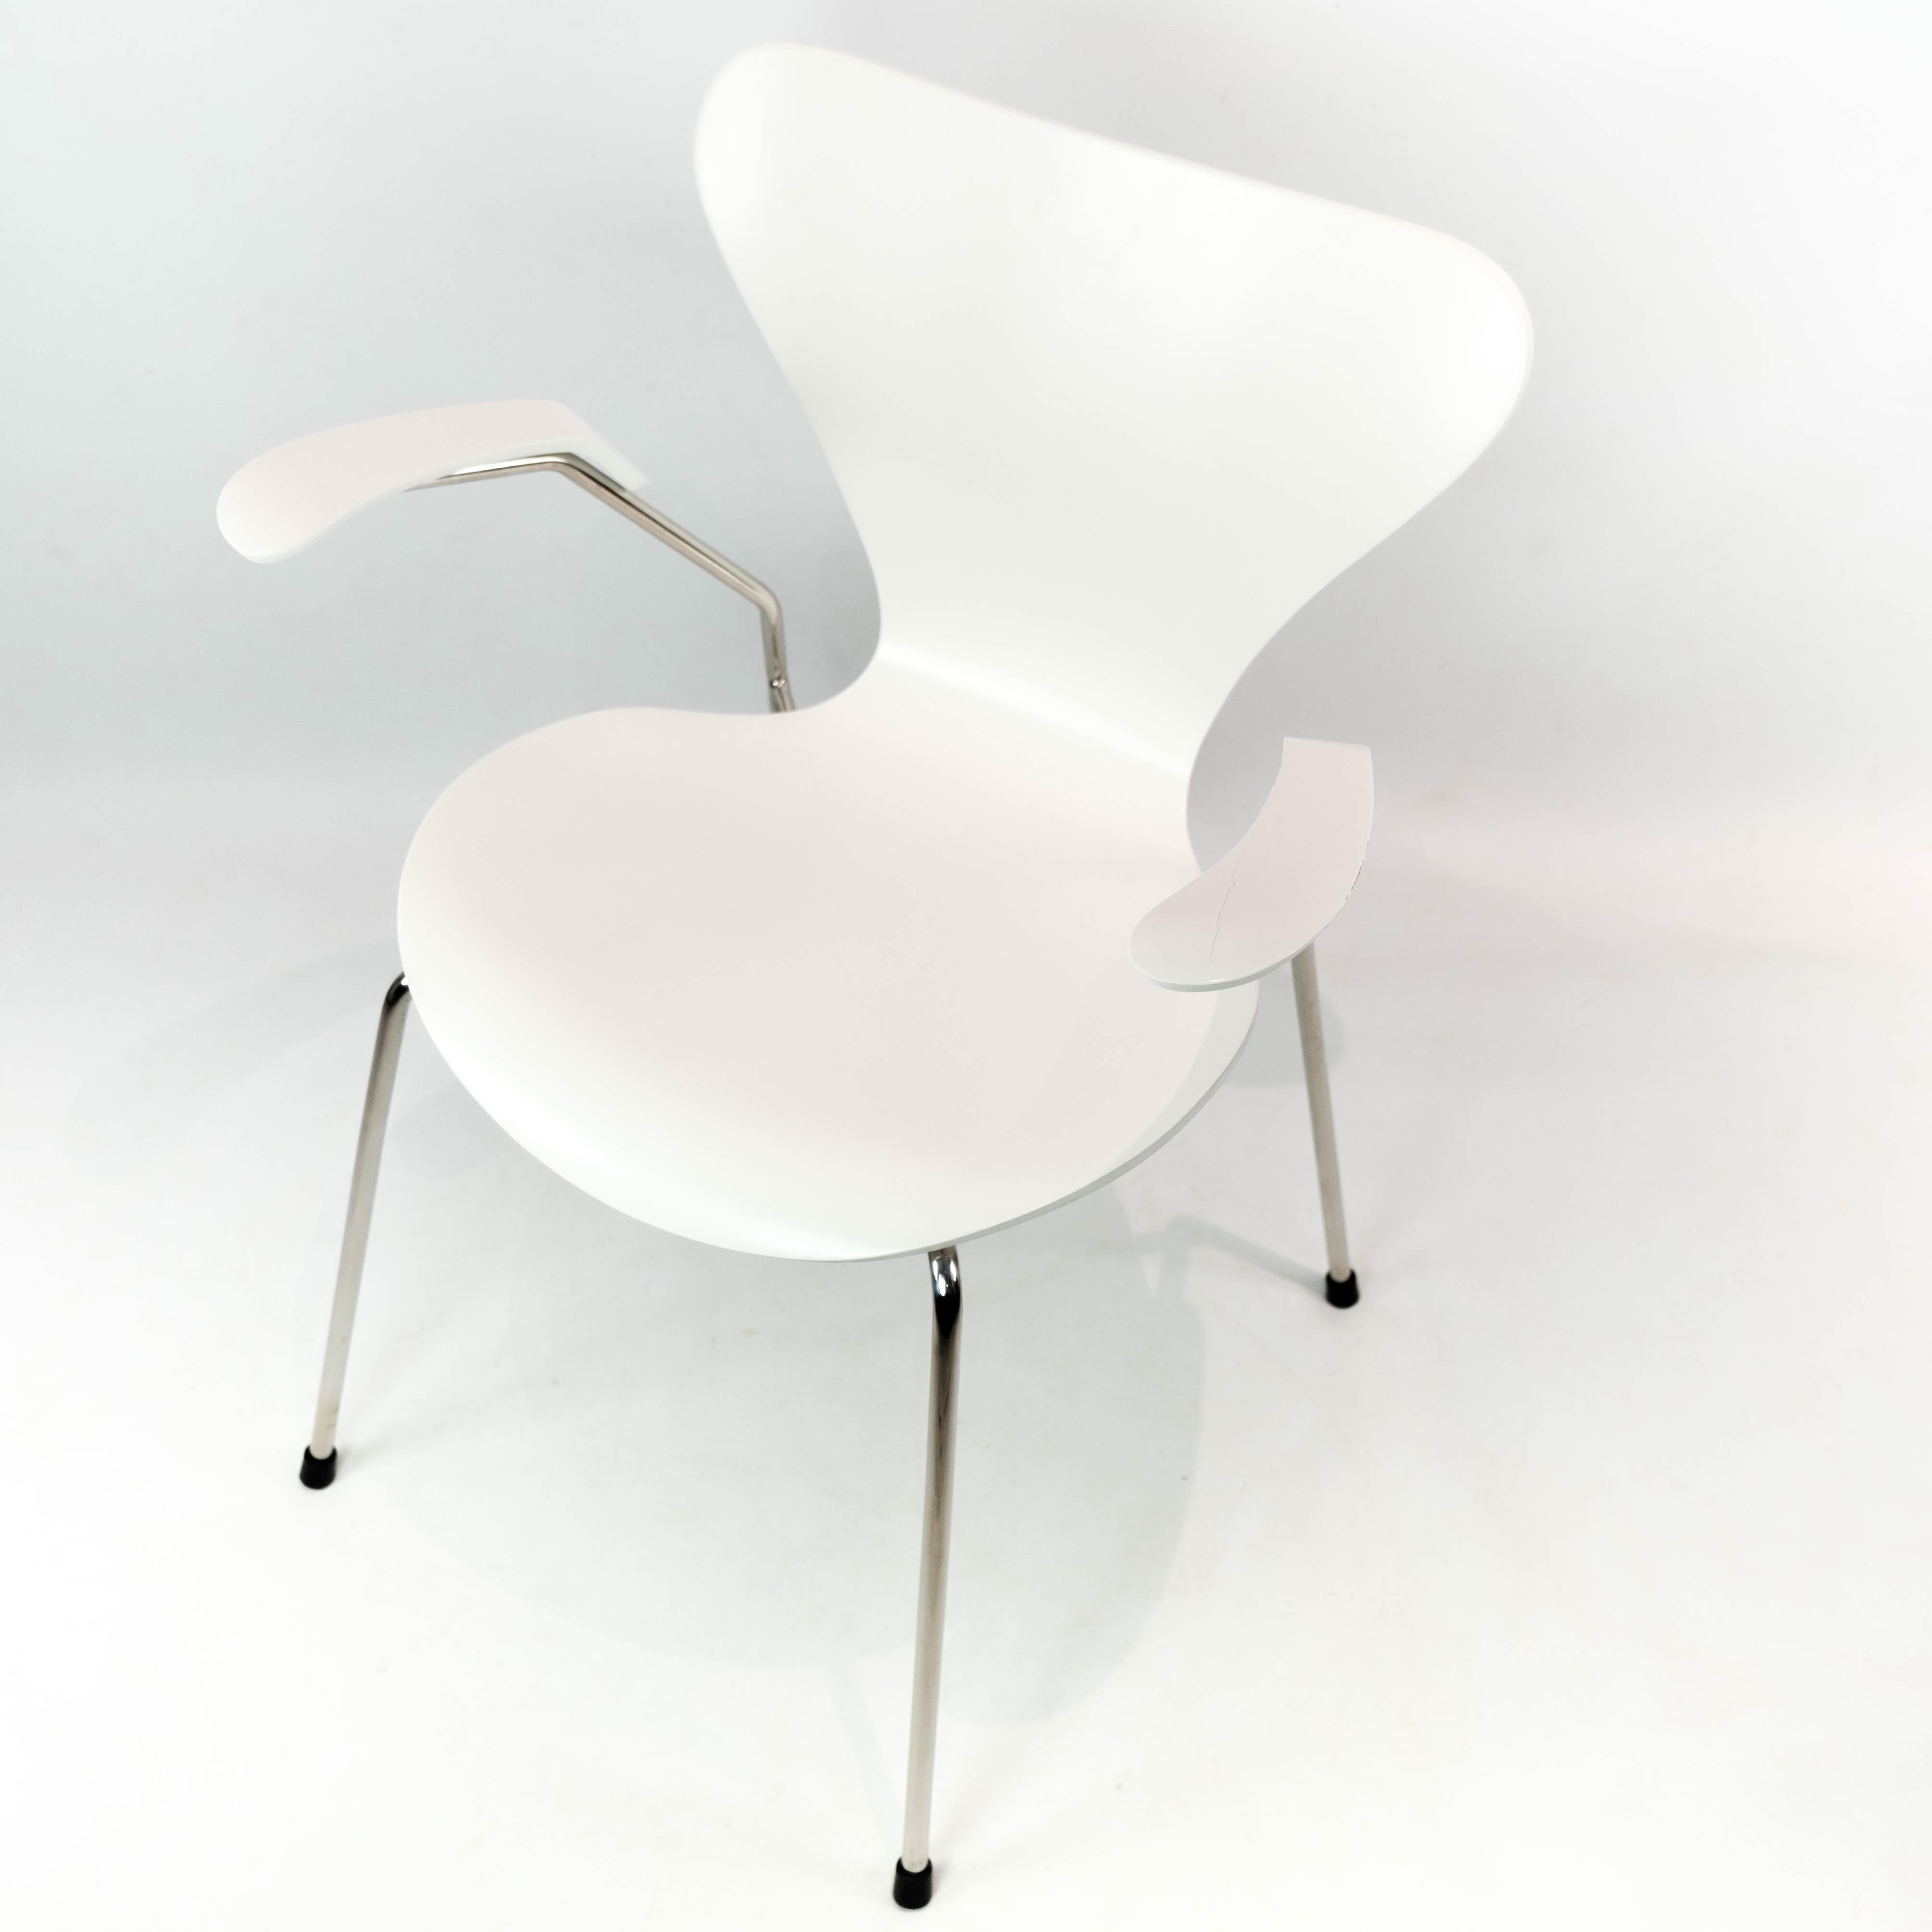 White seven chair, model 3207, with armrests designed by Arne Jacobsen in 1955 and manufactured by Fritz Hansen. The chair is in great vintage condition.